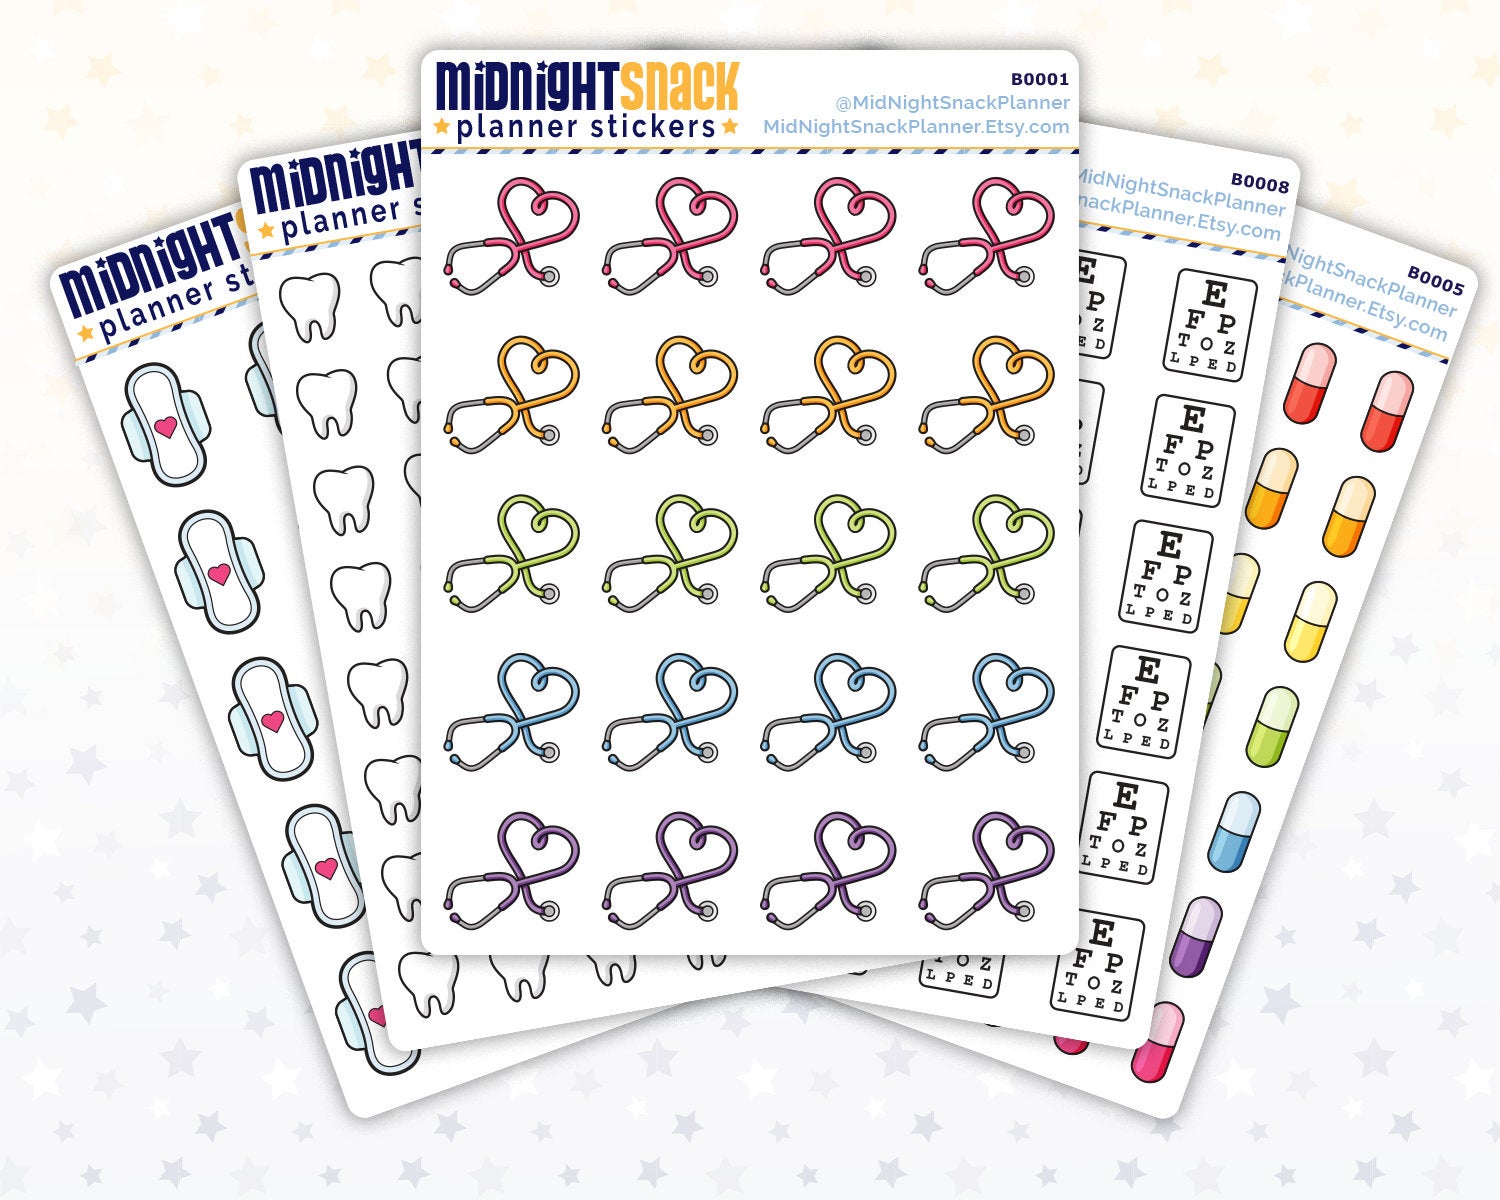 5 Sheet Bundle of Health and Appointments Planner Stickers from Midnight Snack Planner